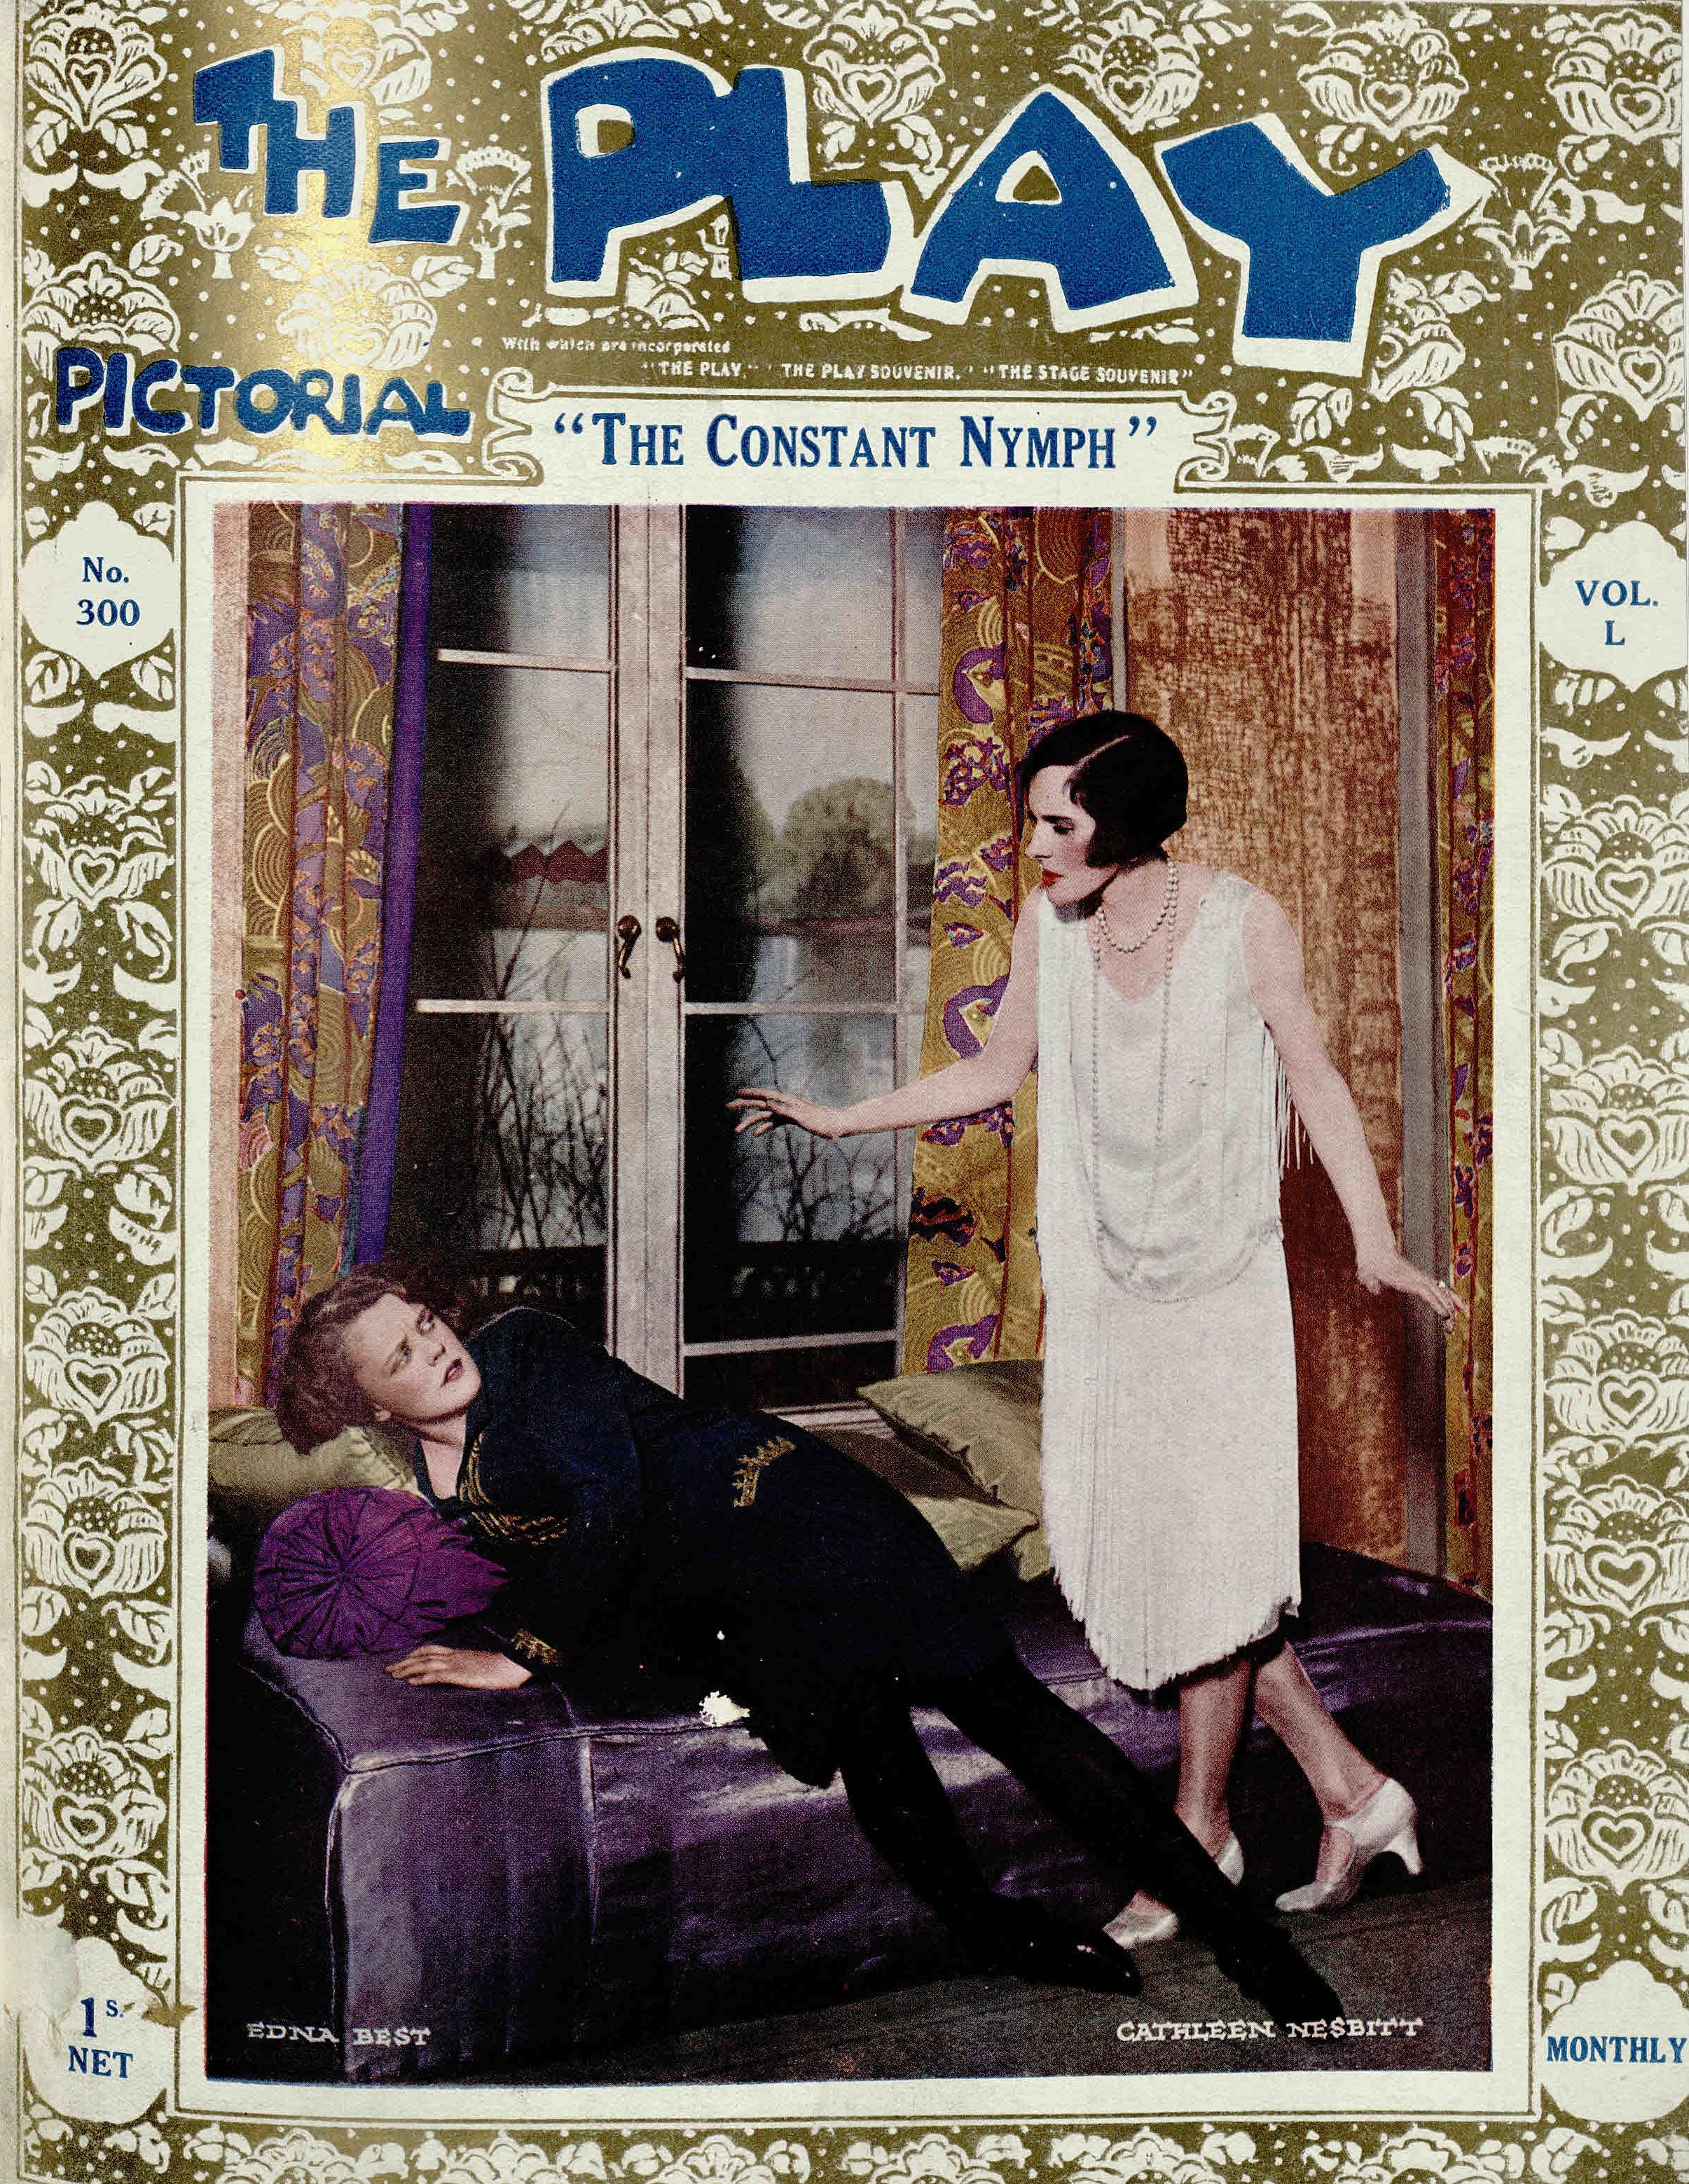 Front cover of Play Pictorial featuring The Constant Nymph